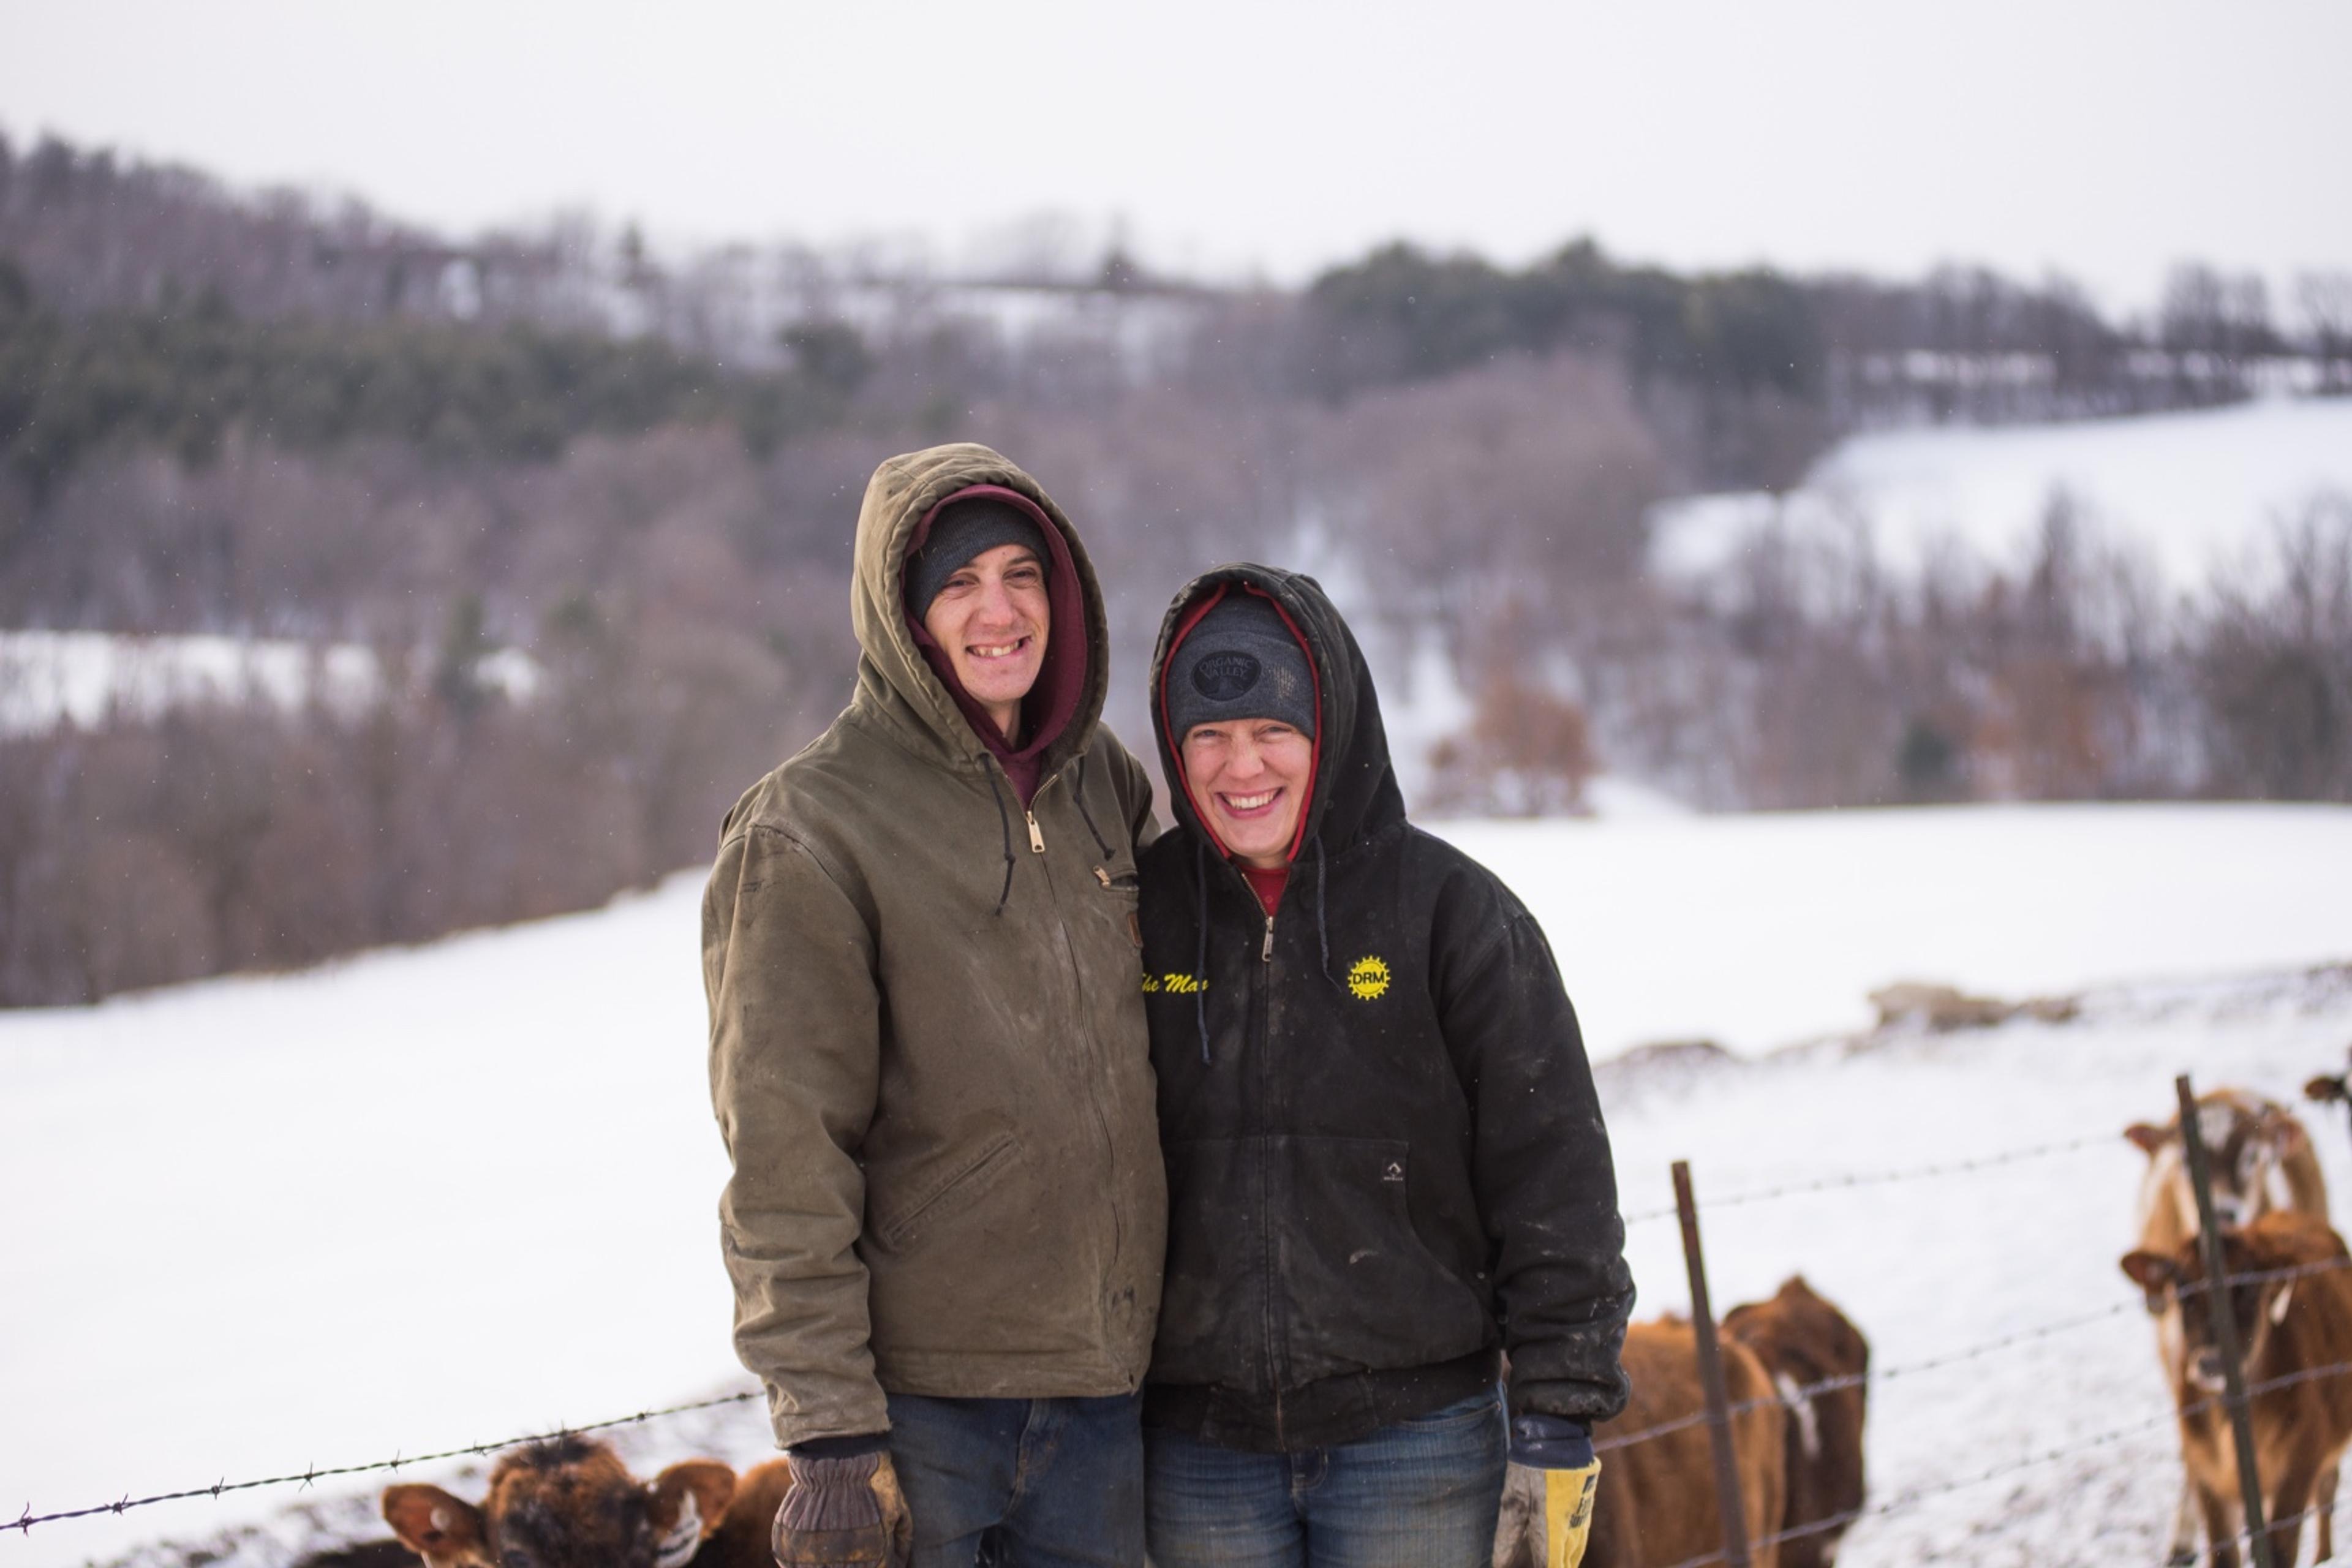 Bundled up in coats, Amy and Marques Koenig smile and look into the camera while standing in front of a snowy pasture with cows.